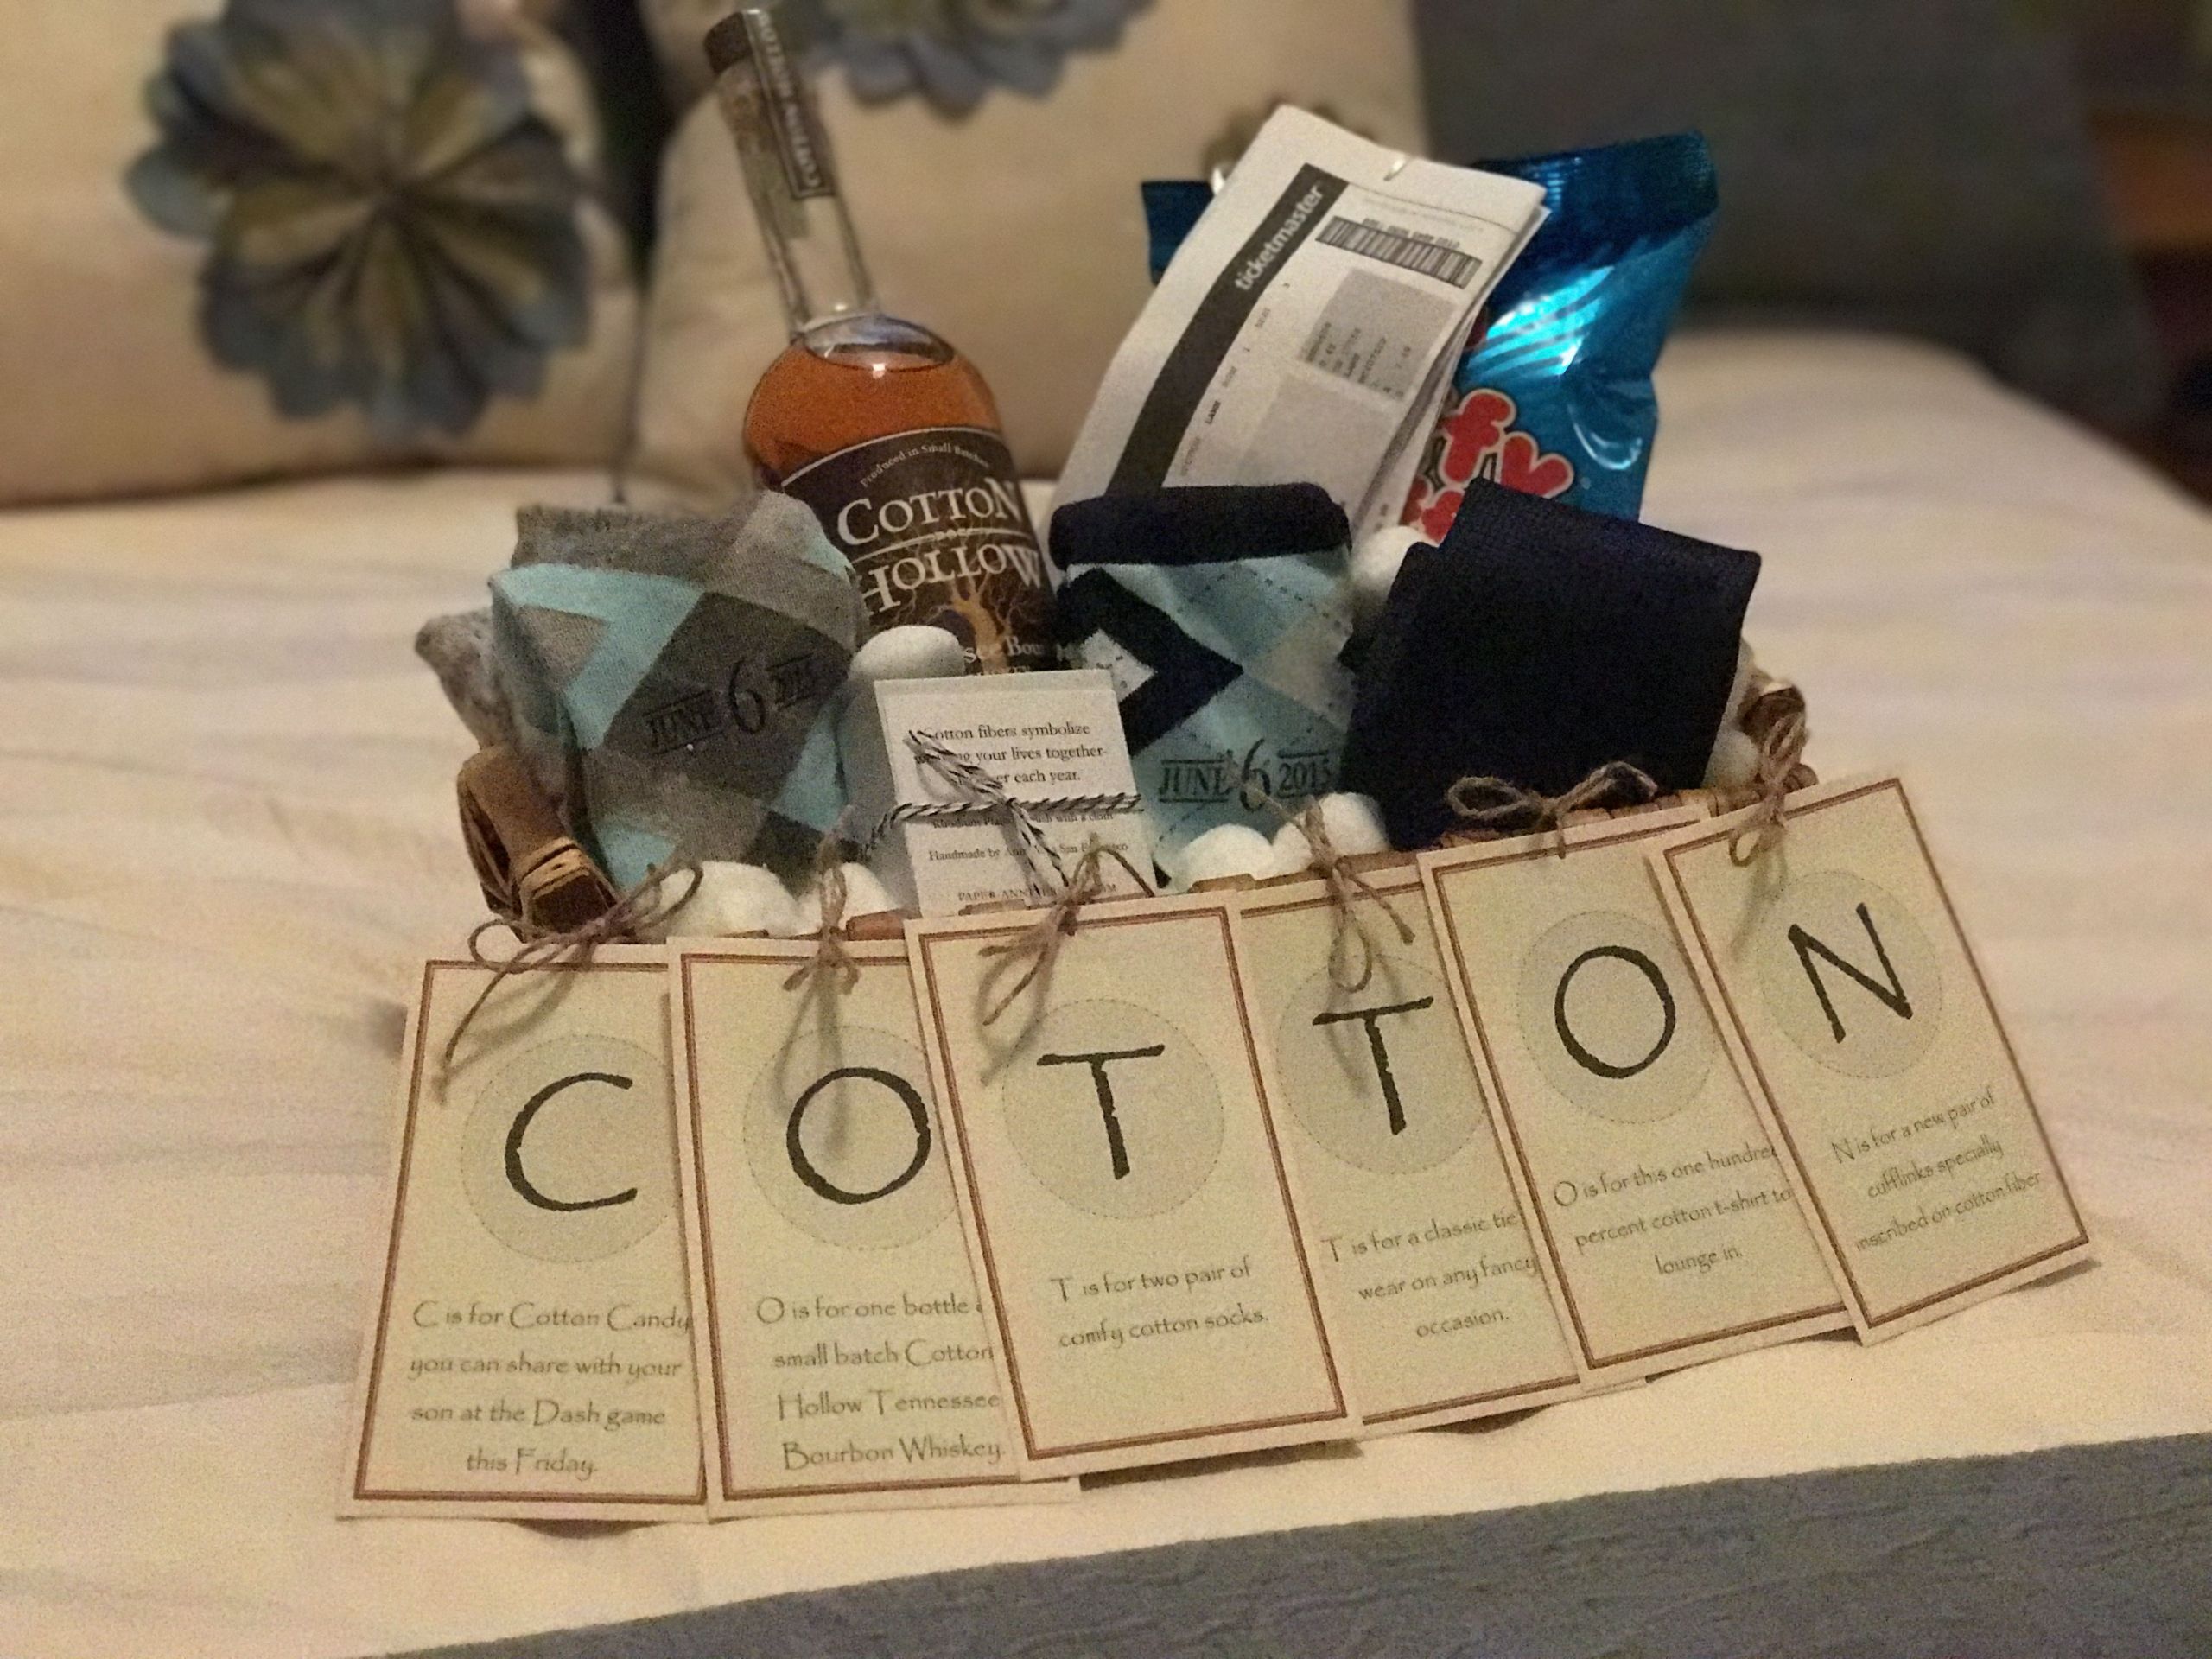 2Nd Year Anniversary Gift Ideas For Him
 The "Cotton" Anniversary Gift for Him